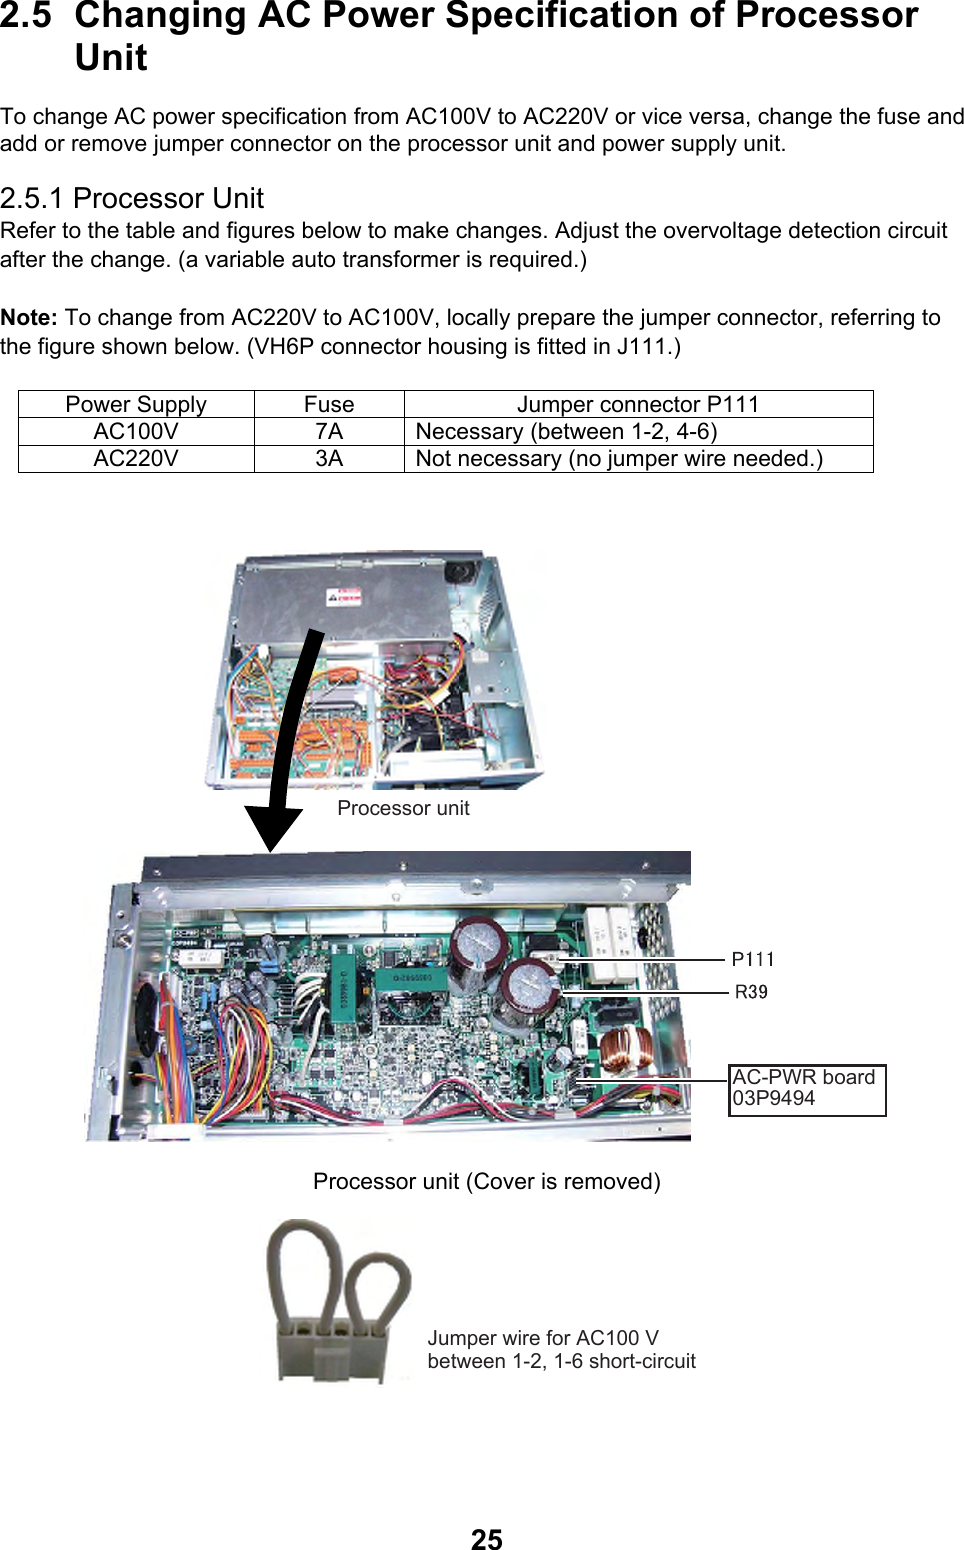  252.5  Changing AC Power Specification of Processor Unit To change AC power specification from AC100V to AC220V or vice versa, change the fuse and add or remove jumper connector on the processor unit and power supply unit.  2.5.1 Processor Unit Refer to the table and figures below to make changes. Adjust the overvoltage detection circuit after the change. (a variable auto transformer is required.)  Note: To change from AC220V to AC100V, locally prepare the jumper connector, referring to the figure shown below. (VH6P connector housing is fitted in J111.)  Power Supply  Fuse  Jumper connector P111 AC100V  7A  Necessary (between 1-2, 4-6) AC220V  3A  Not necessary (no jumper wire needed.)  Processor unitAC-PWR board03P9494 Processor unit (Cover is removed) Jumper wire for AC100 V between 1-2, 1-6 short-circuit 